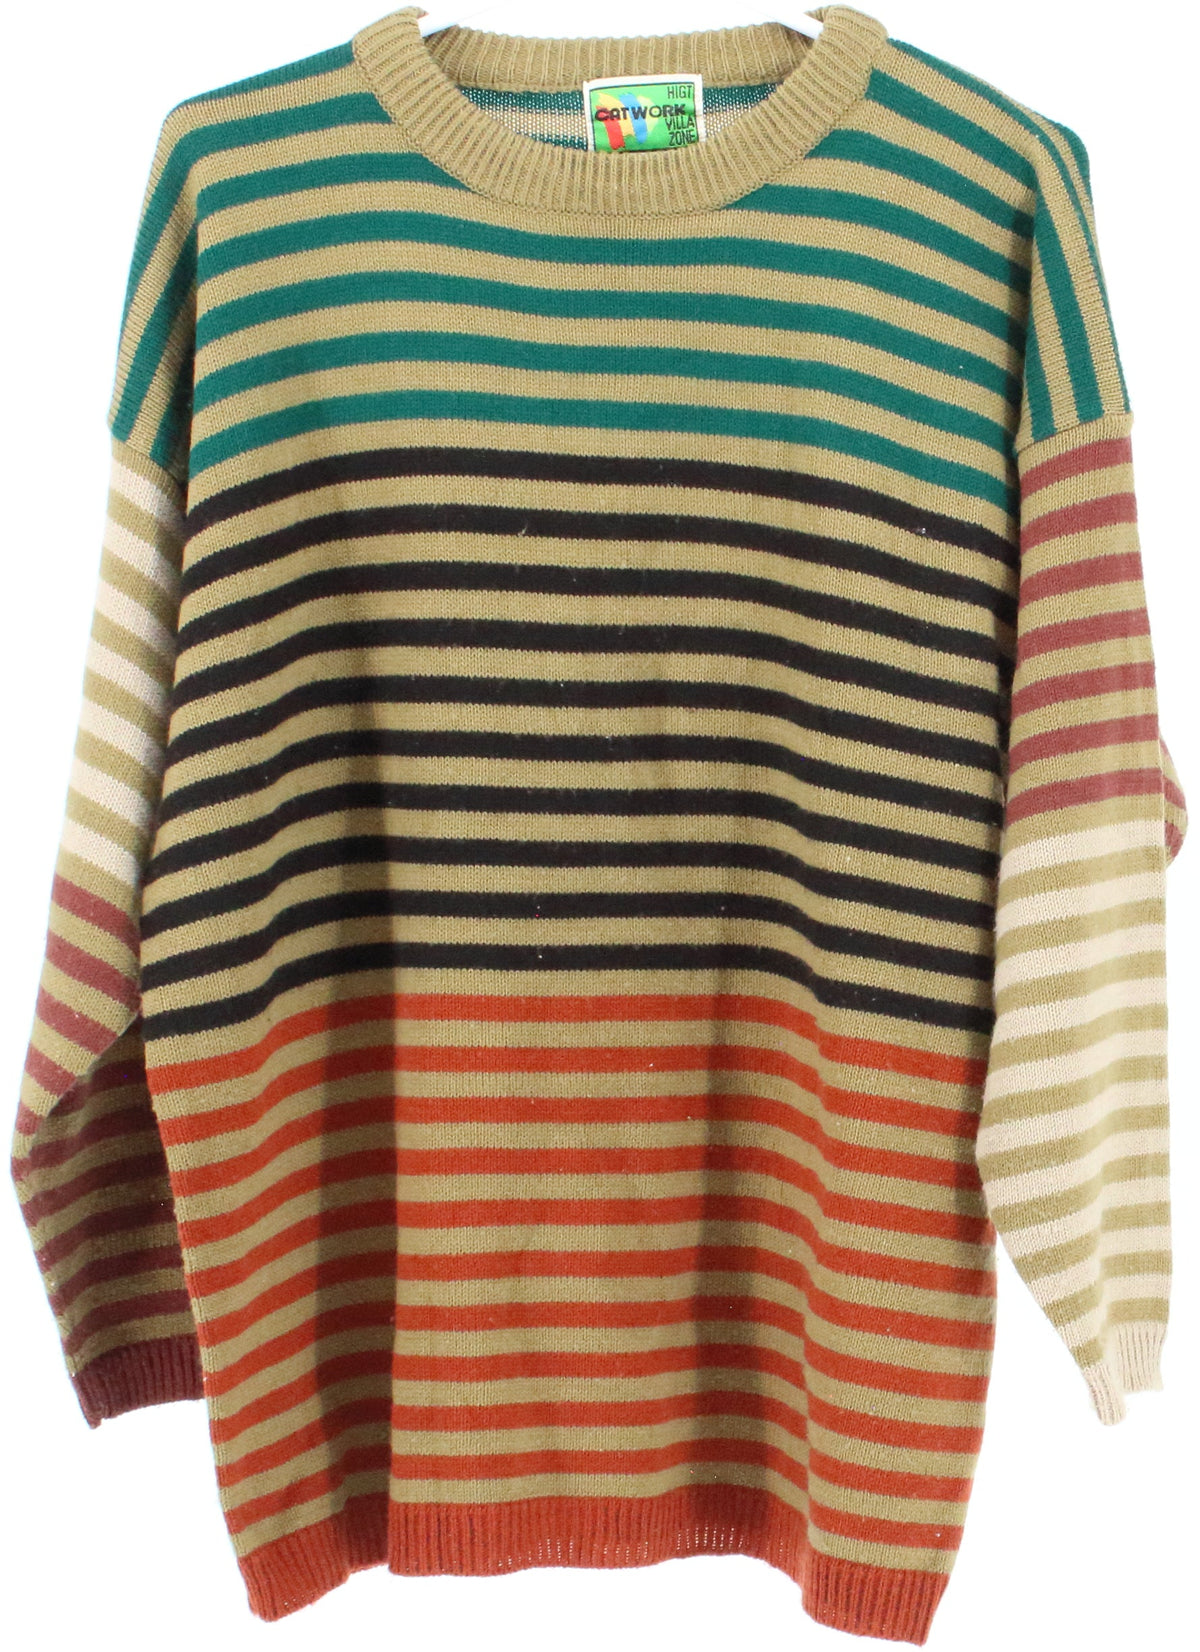 Cat Work Beige and Multicolor Striped Men's Sweater